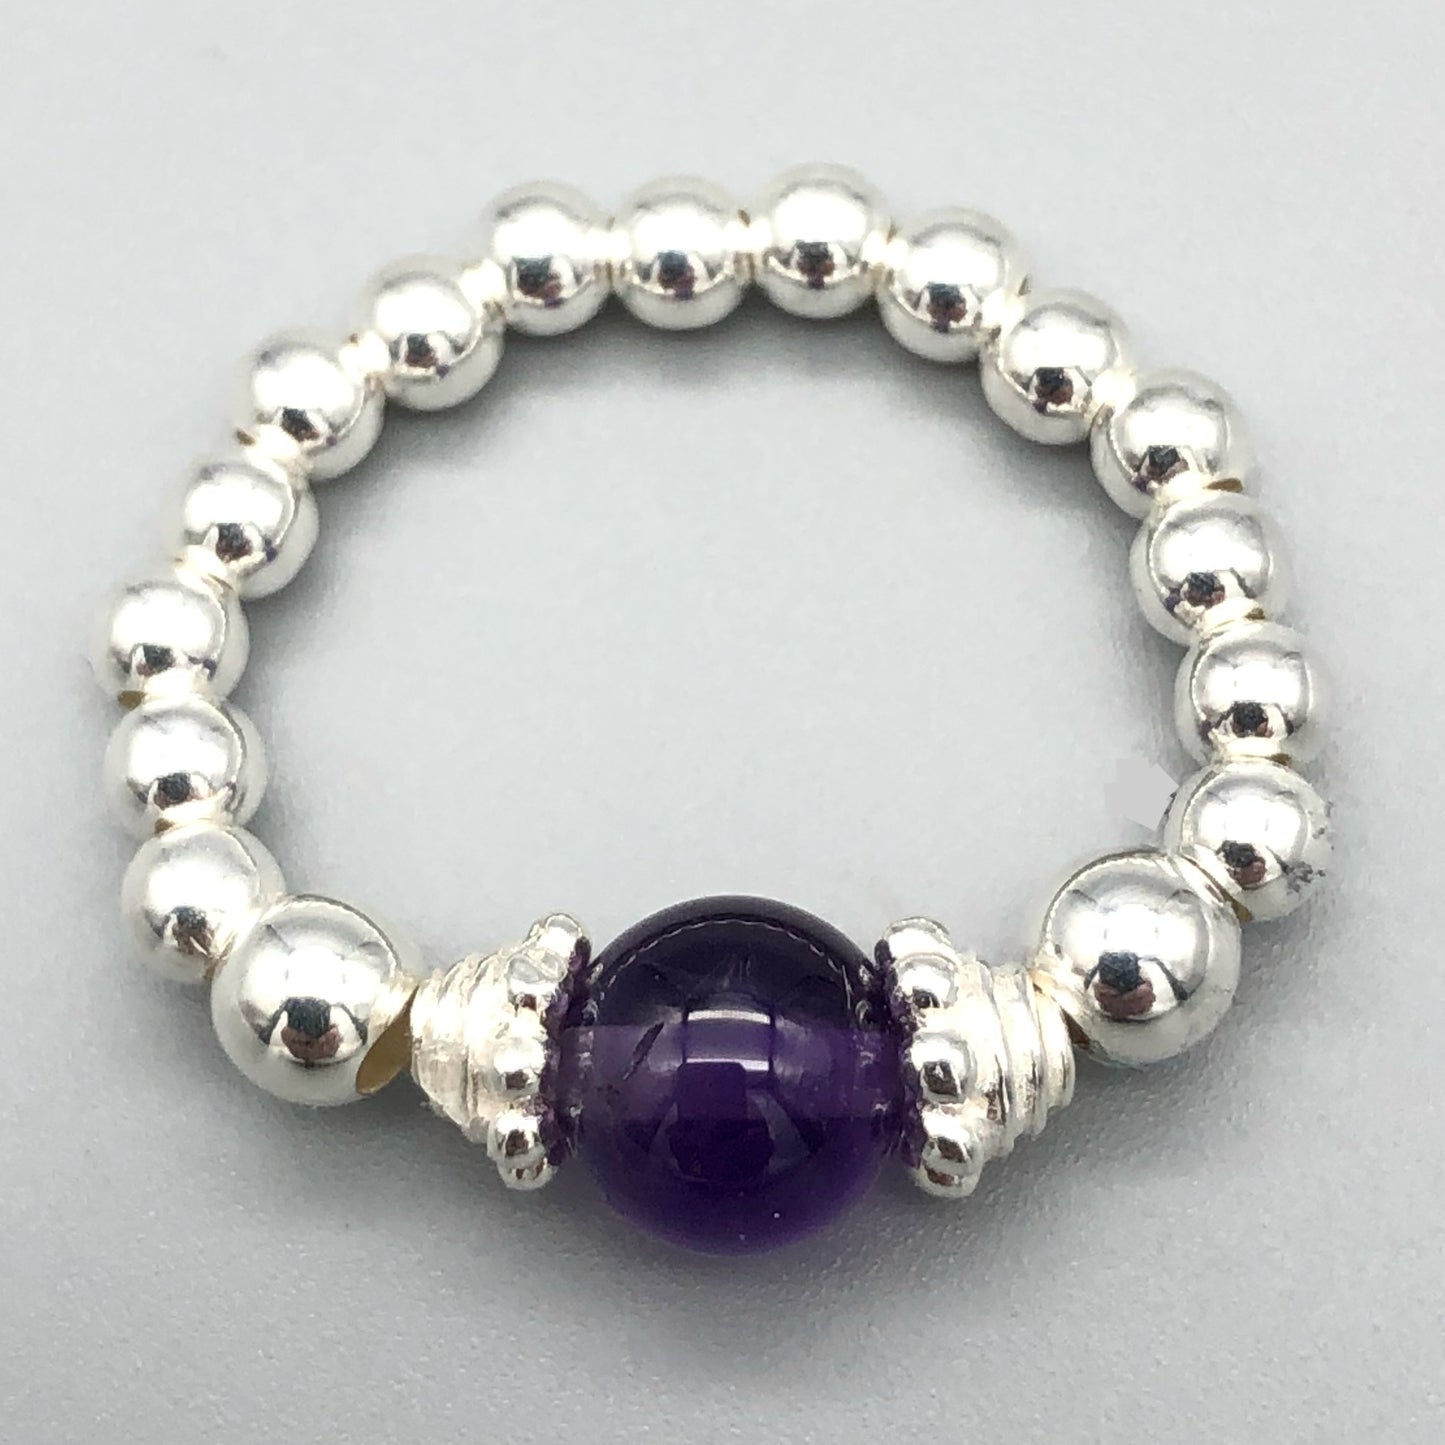 Amethyst bead & sterling silver women's stacking ring by My Silver Wish